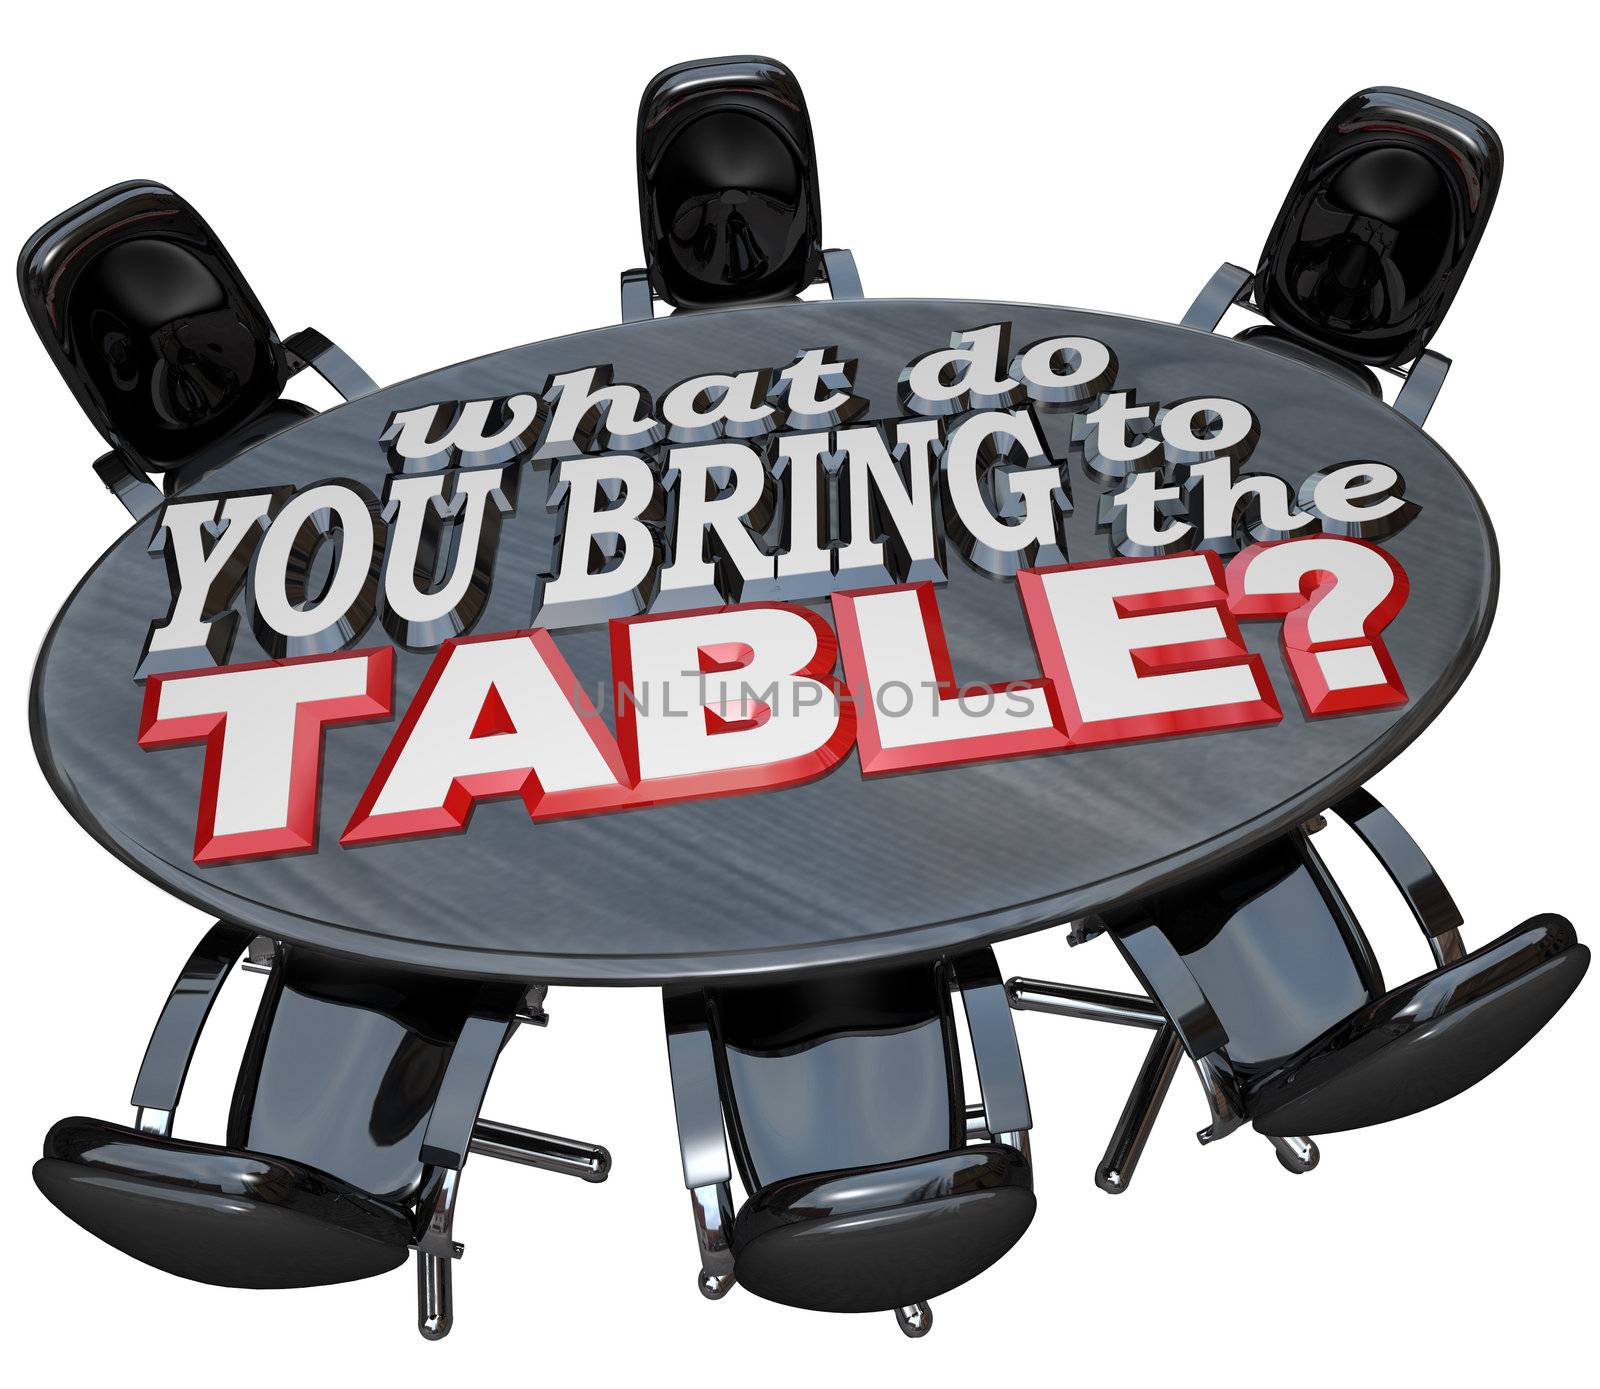 The question What Do You Bring to the Table on a conference meeting room table with words surrounded by black leather chairs, asking if you contribute value to a discussion or teamwork